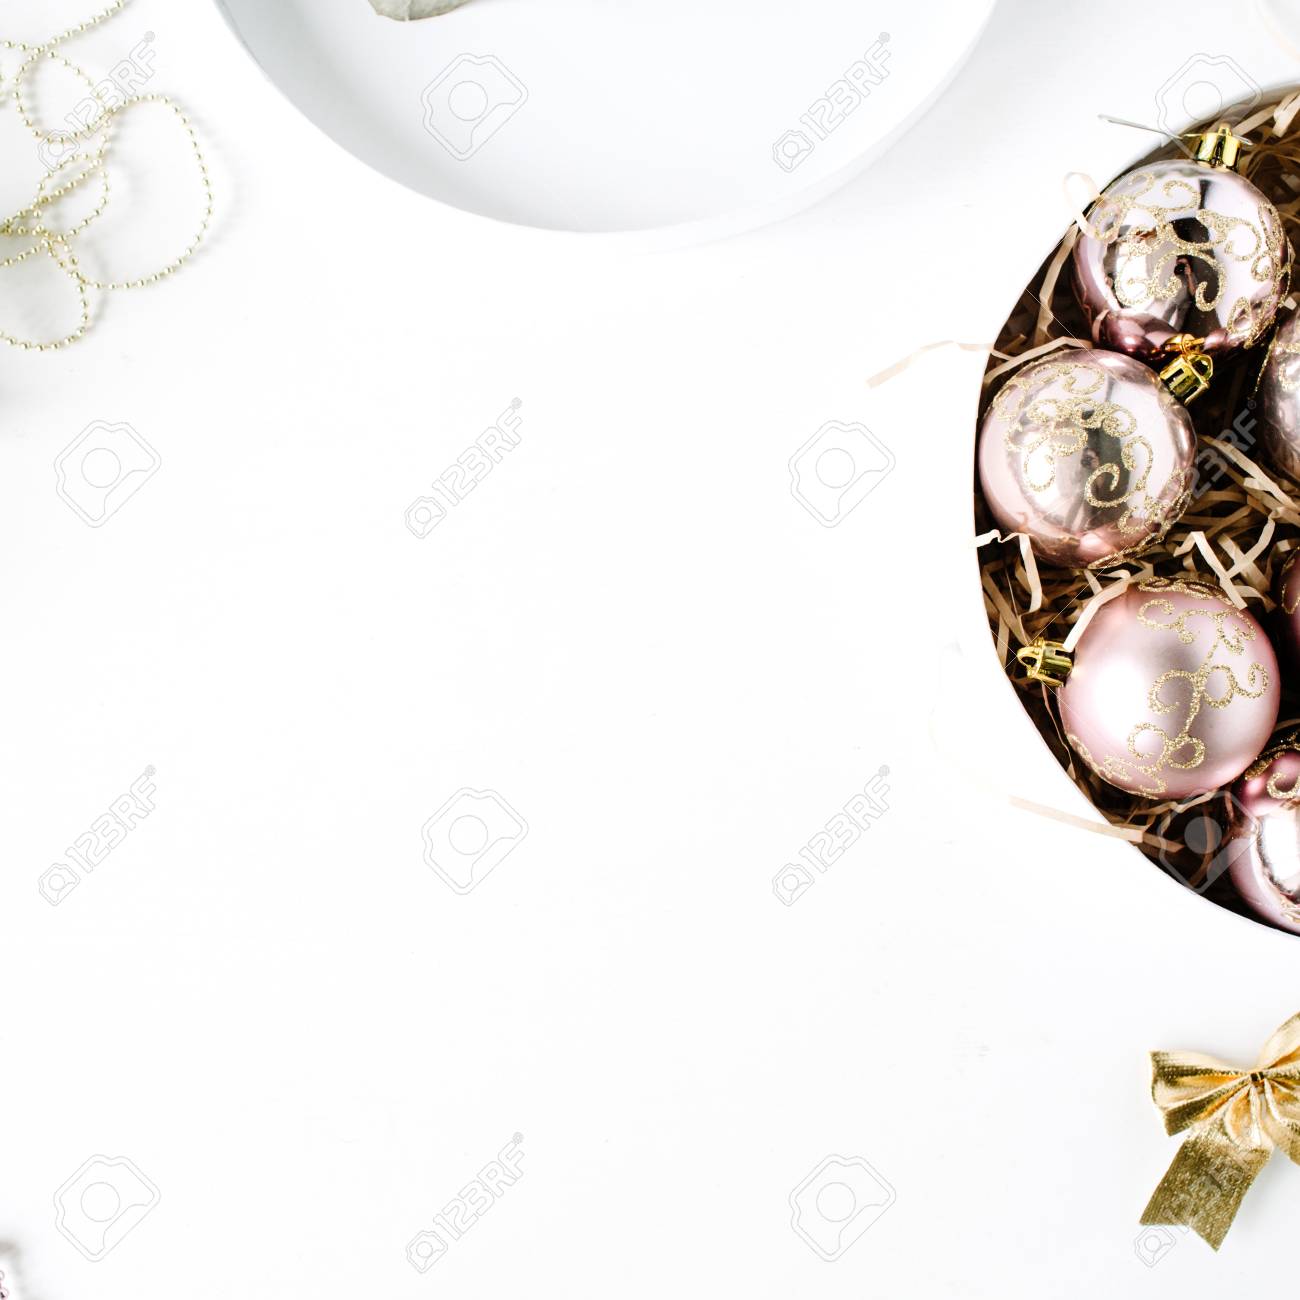 Frame Made Of Christmas Decoration With Glass Balls